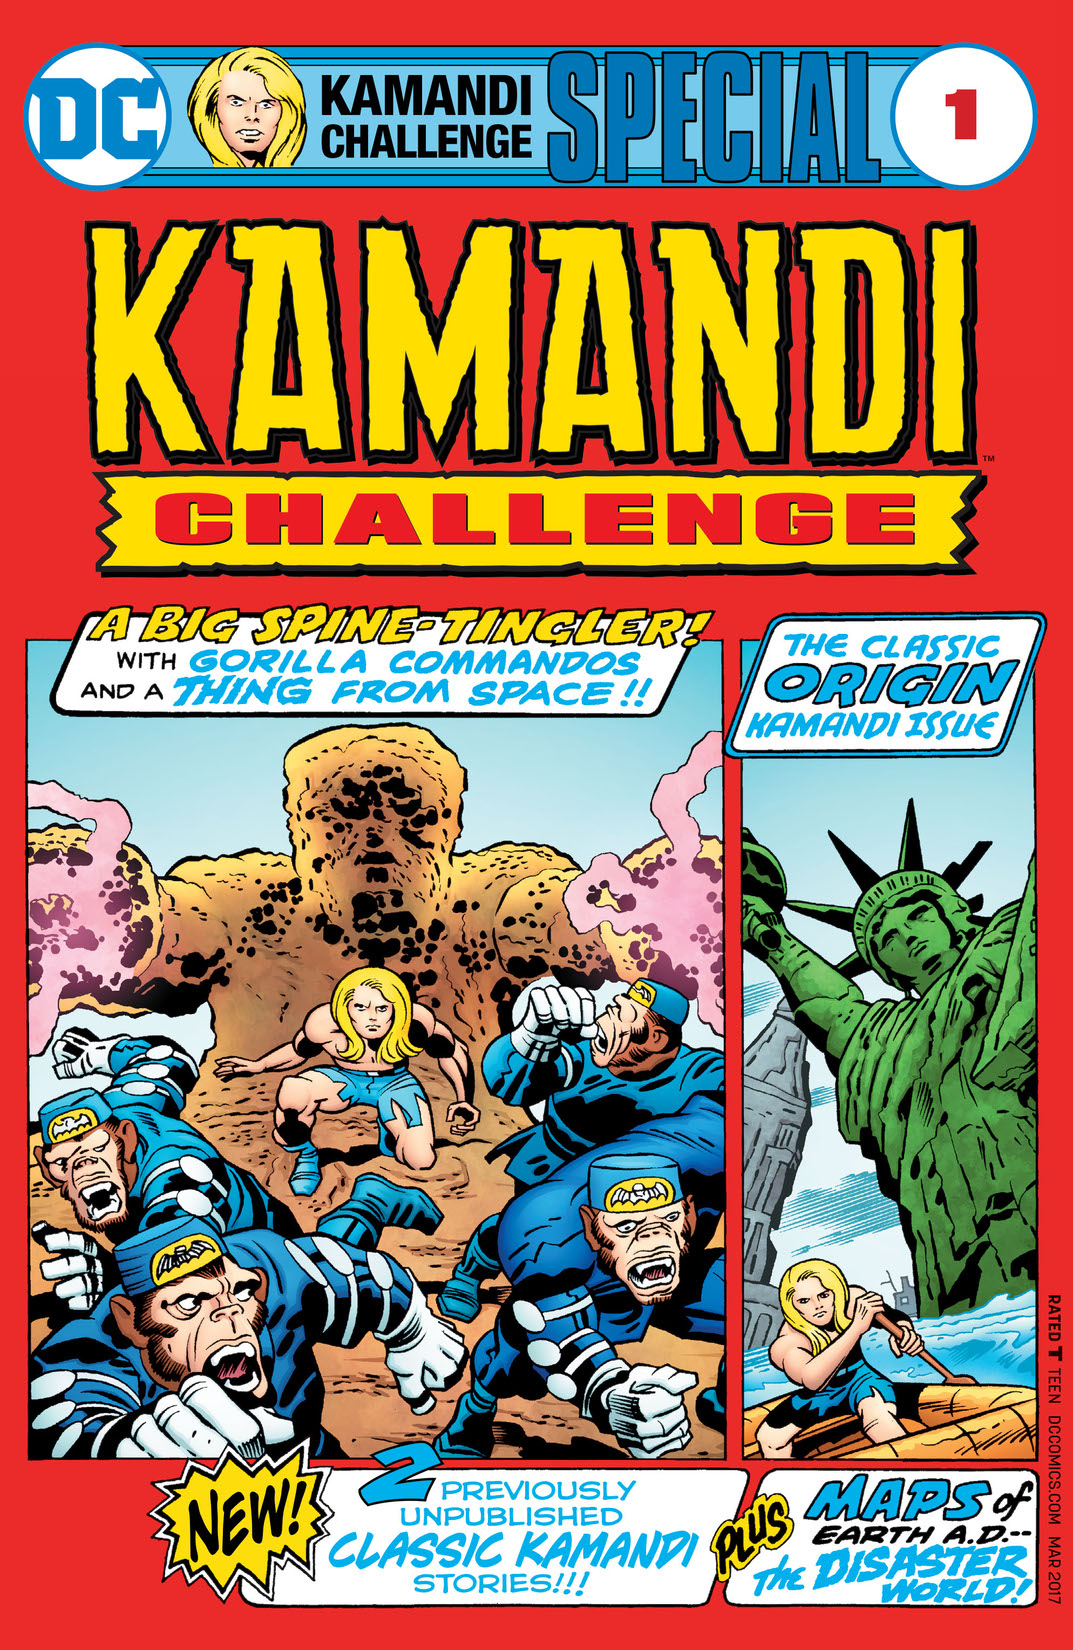 The Kamandi Challenge Special #1 preview images